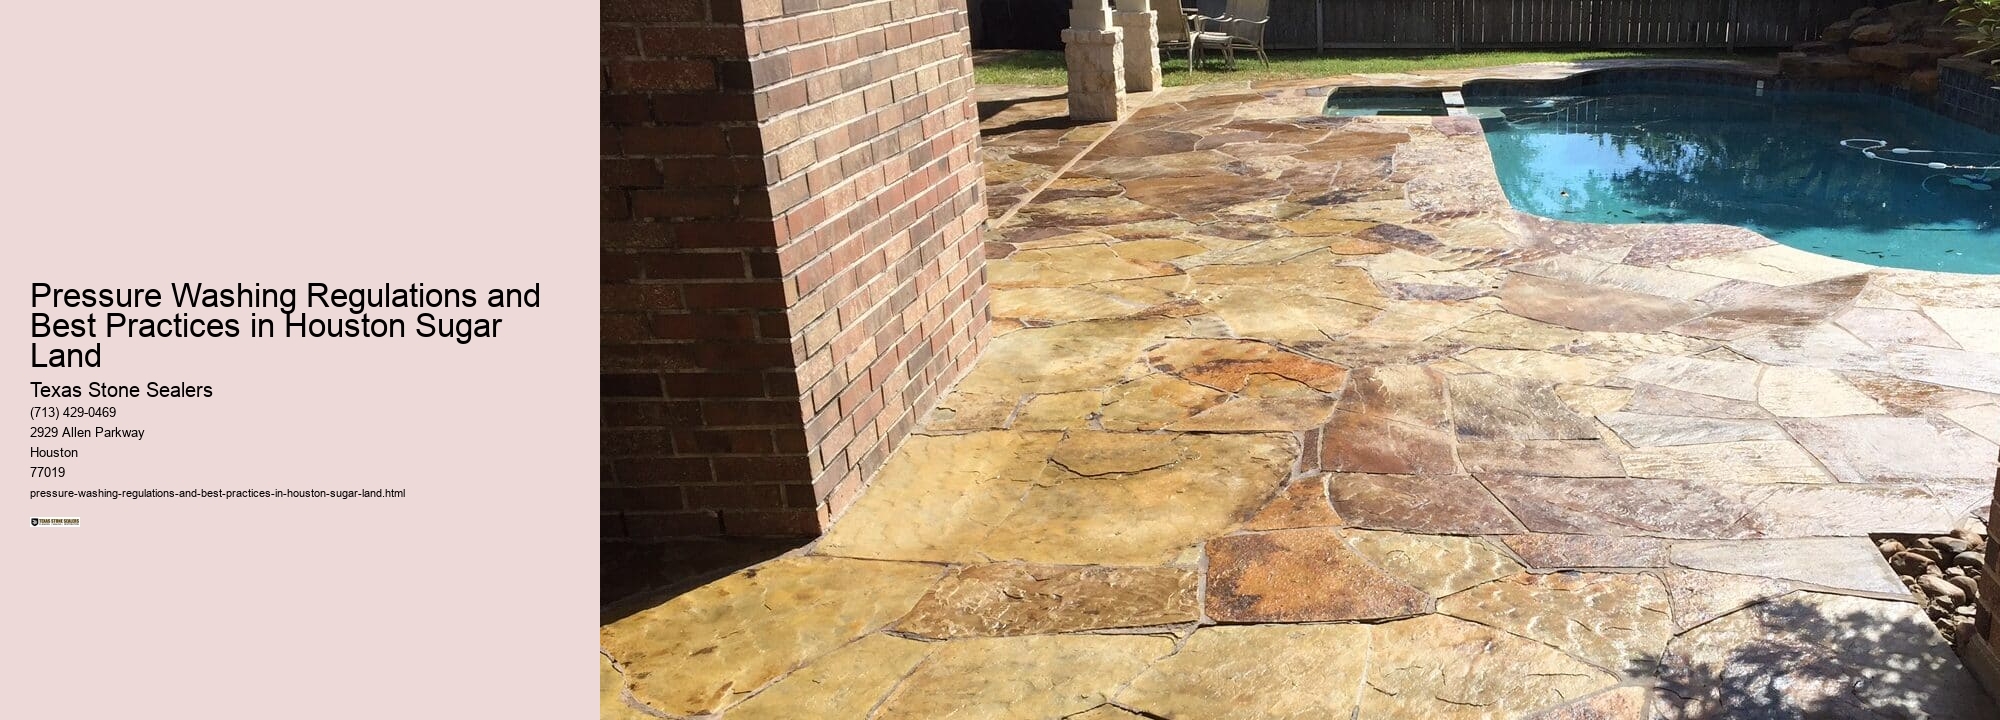 Pressure Washing Regulations and Best Practices in Houston Sugar Land